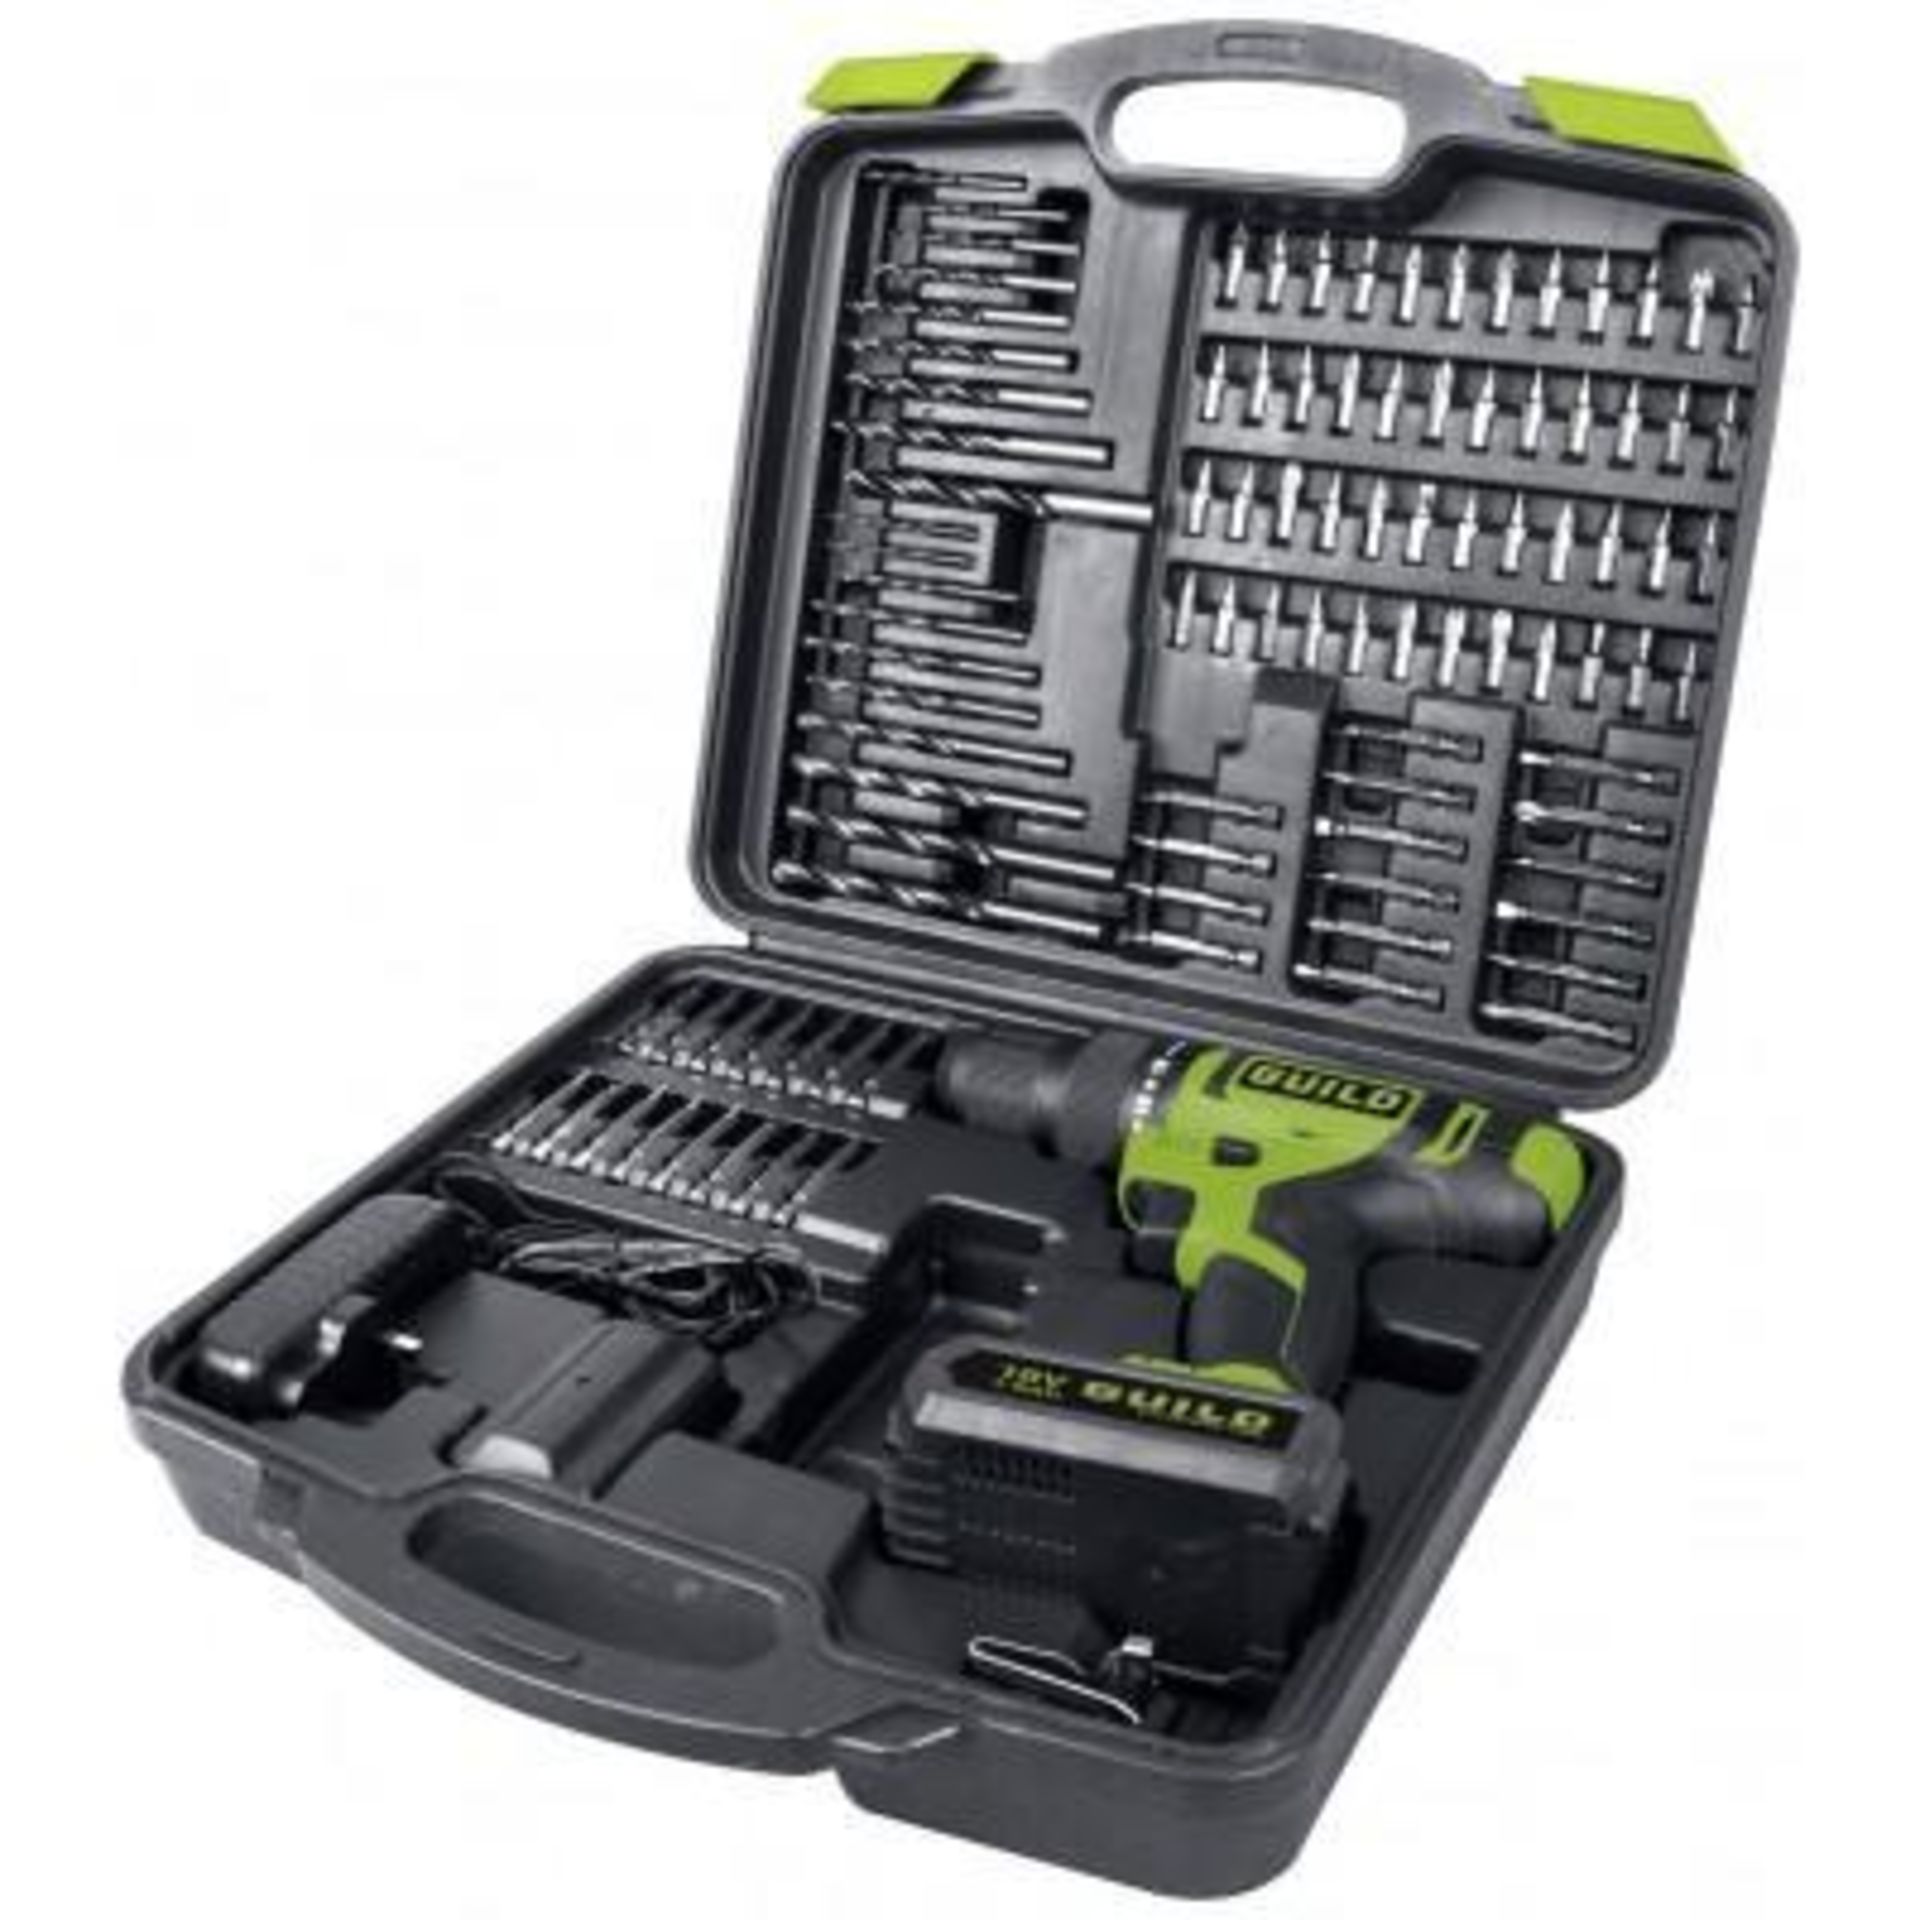 Guild 1.5Ah Cordless Combi Drill with 100 Accessories - 18V 808/6545 £50.00 RRP